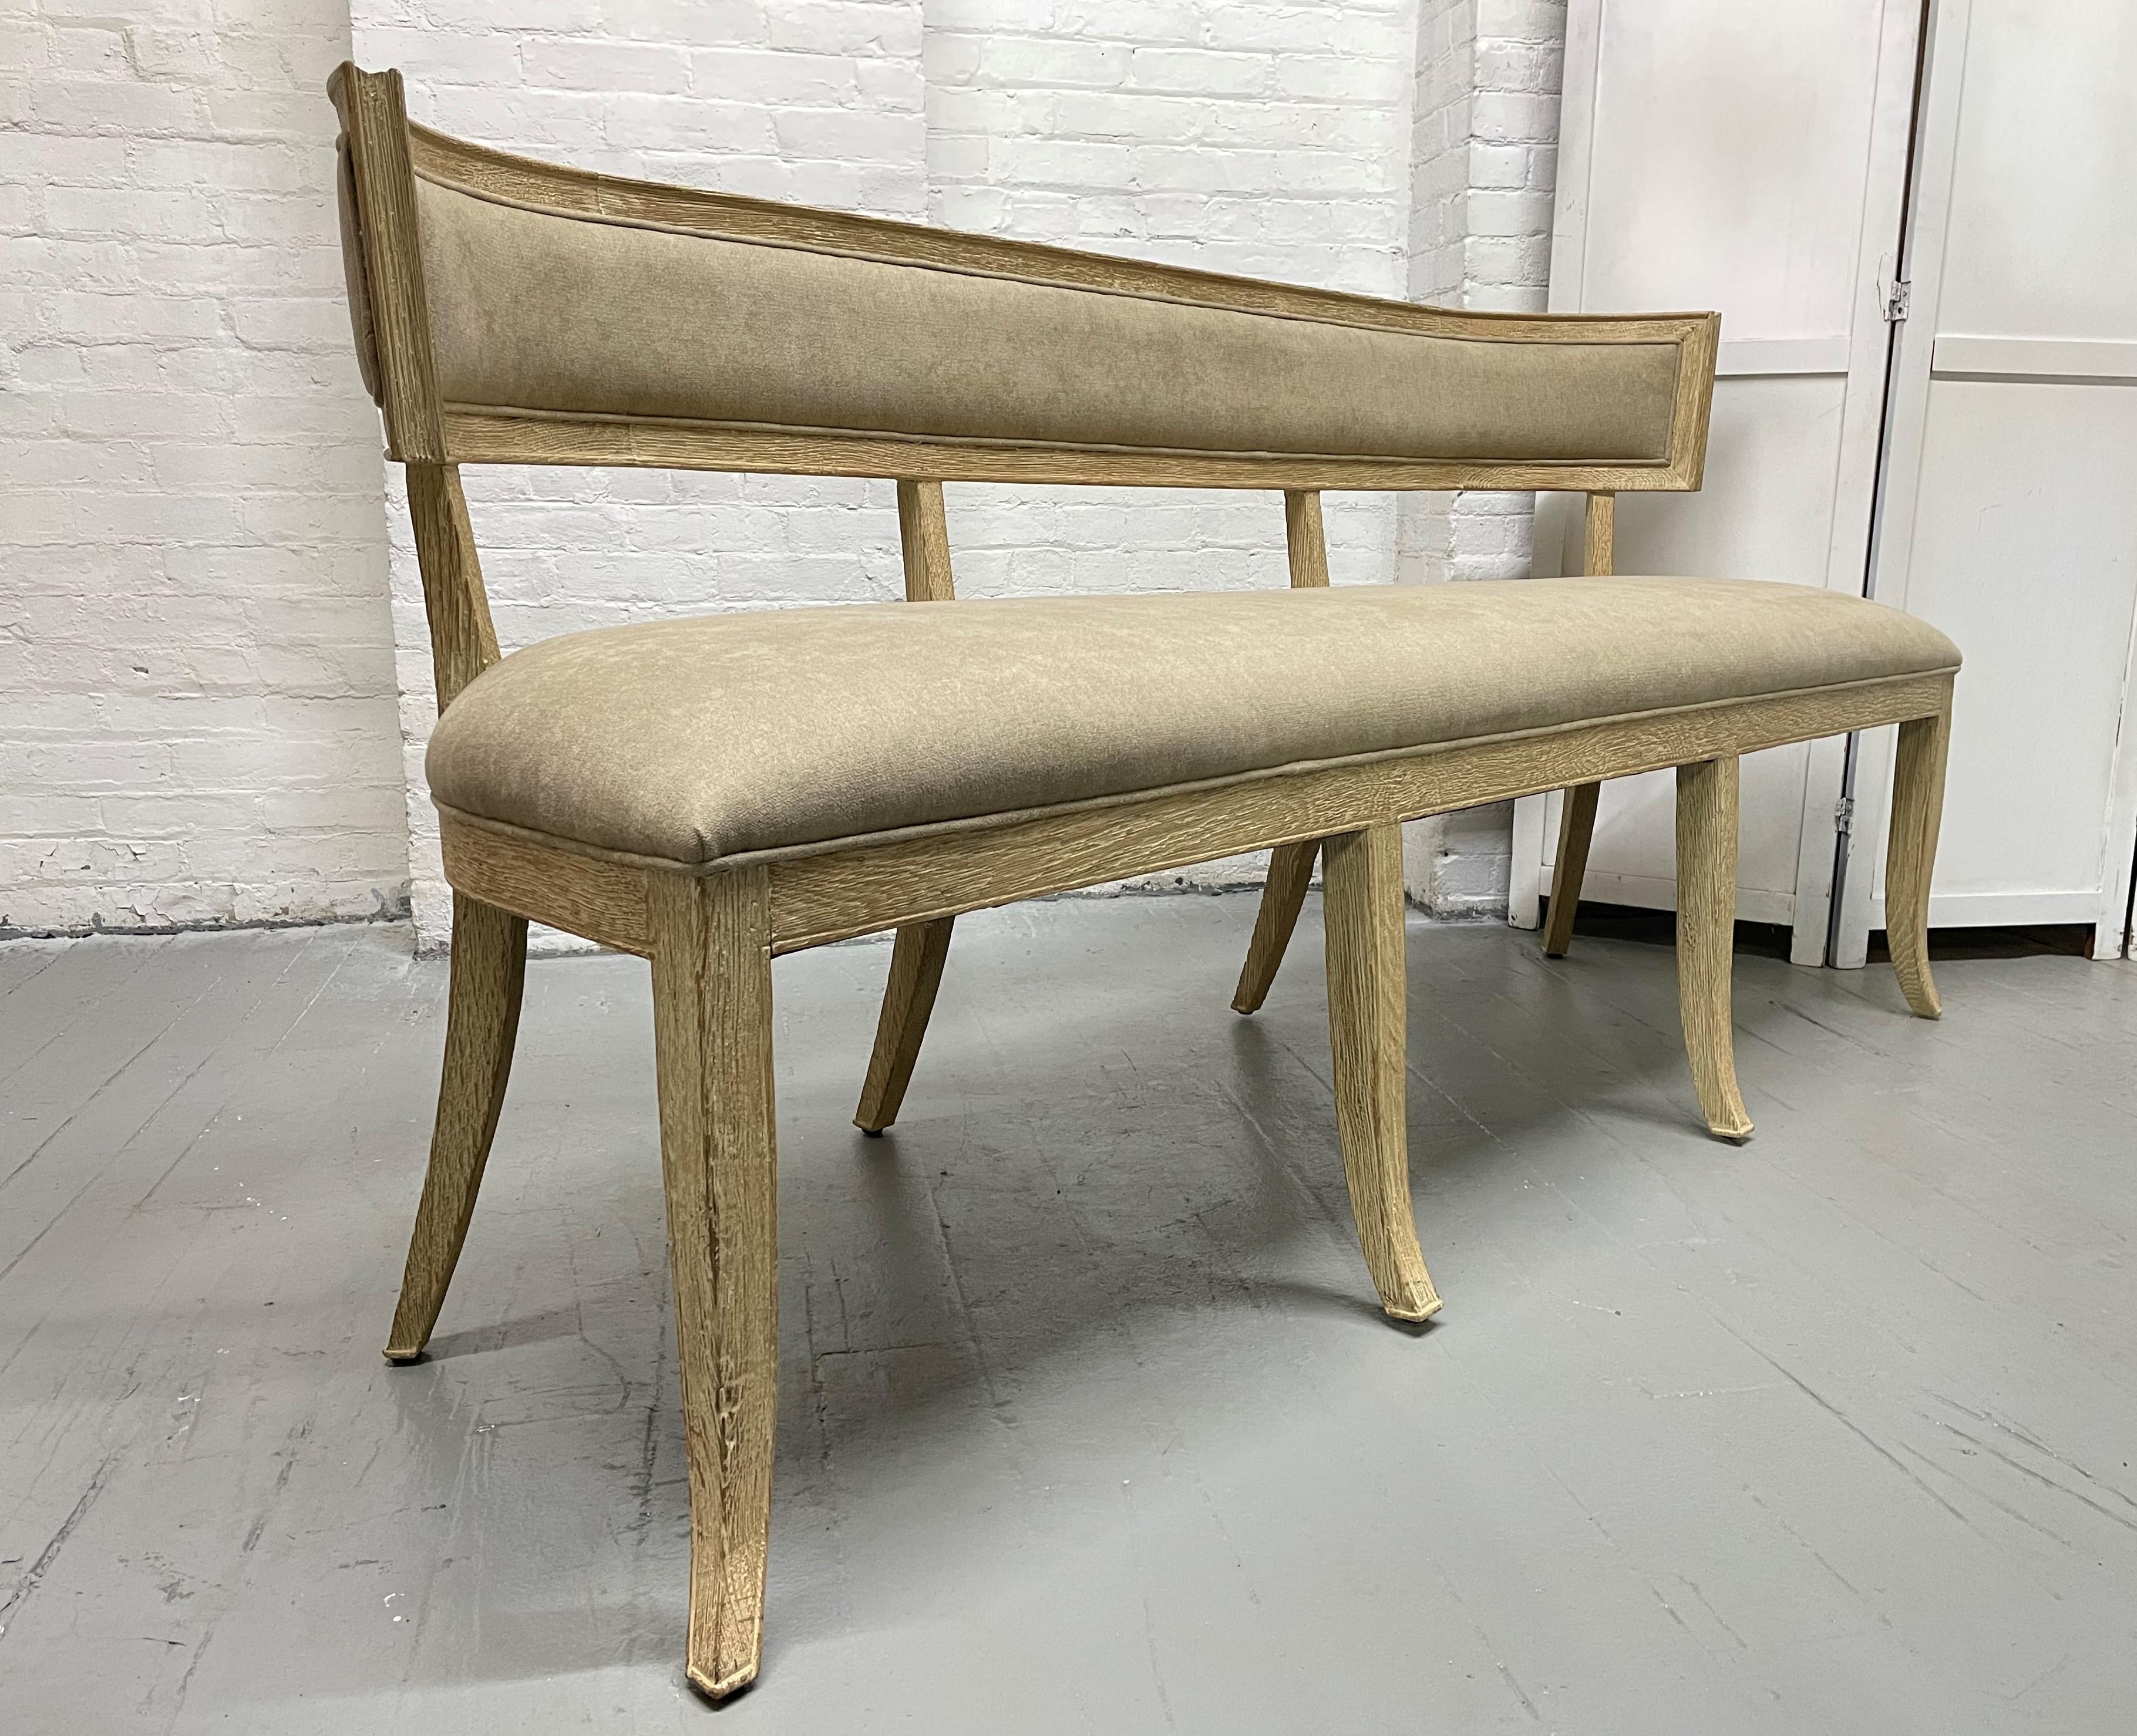 Pair of Cerused oak neoclassical style benches or loveseats. The benches have newly covered fabric seats with each having 8 legs.